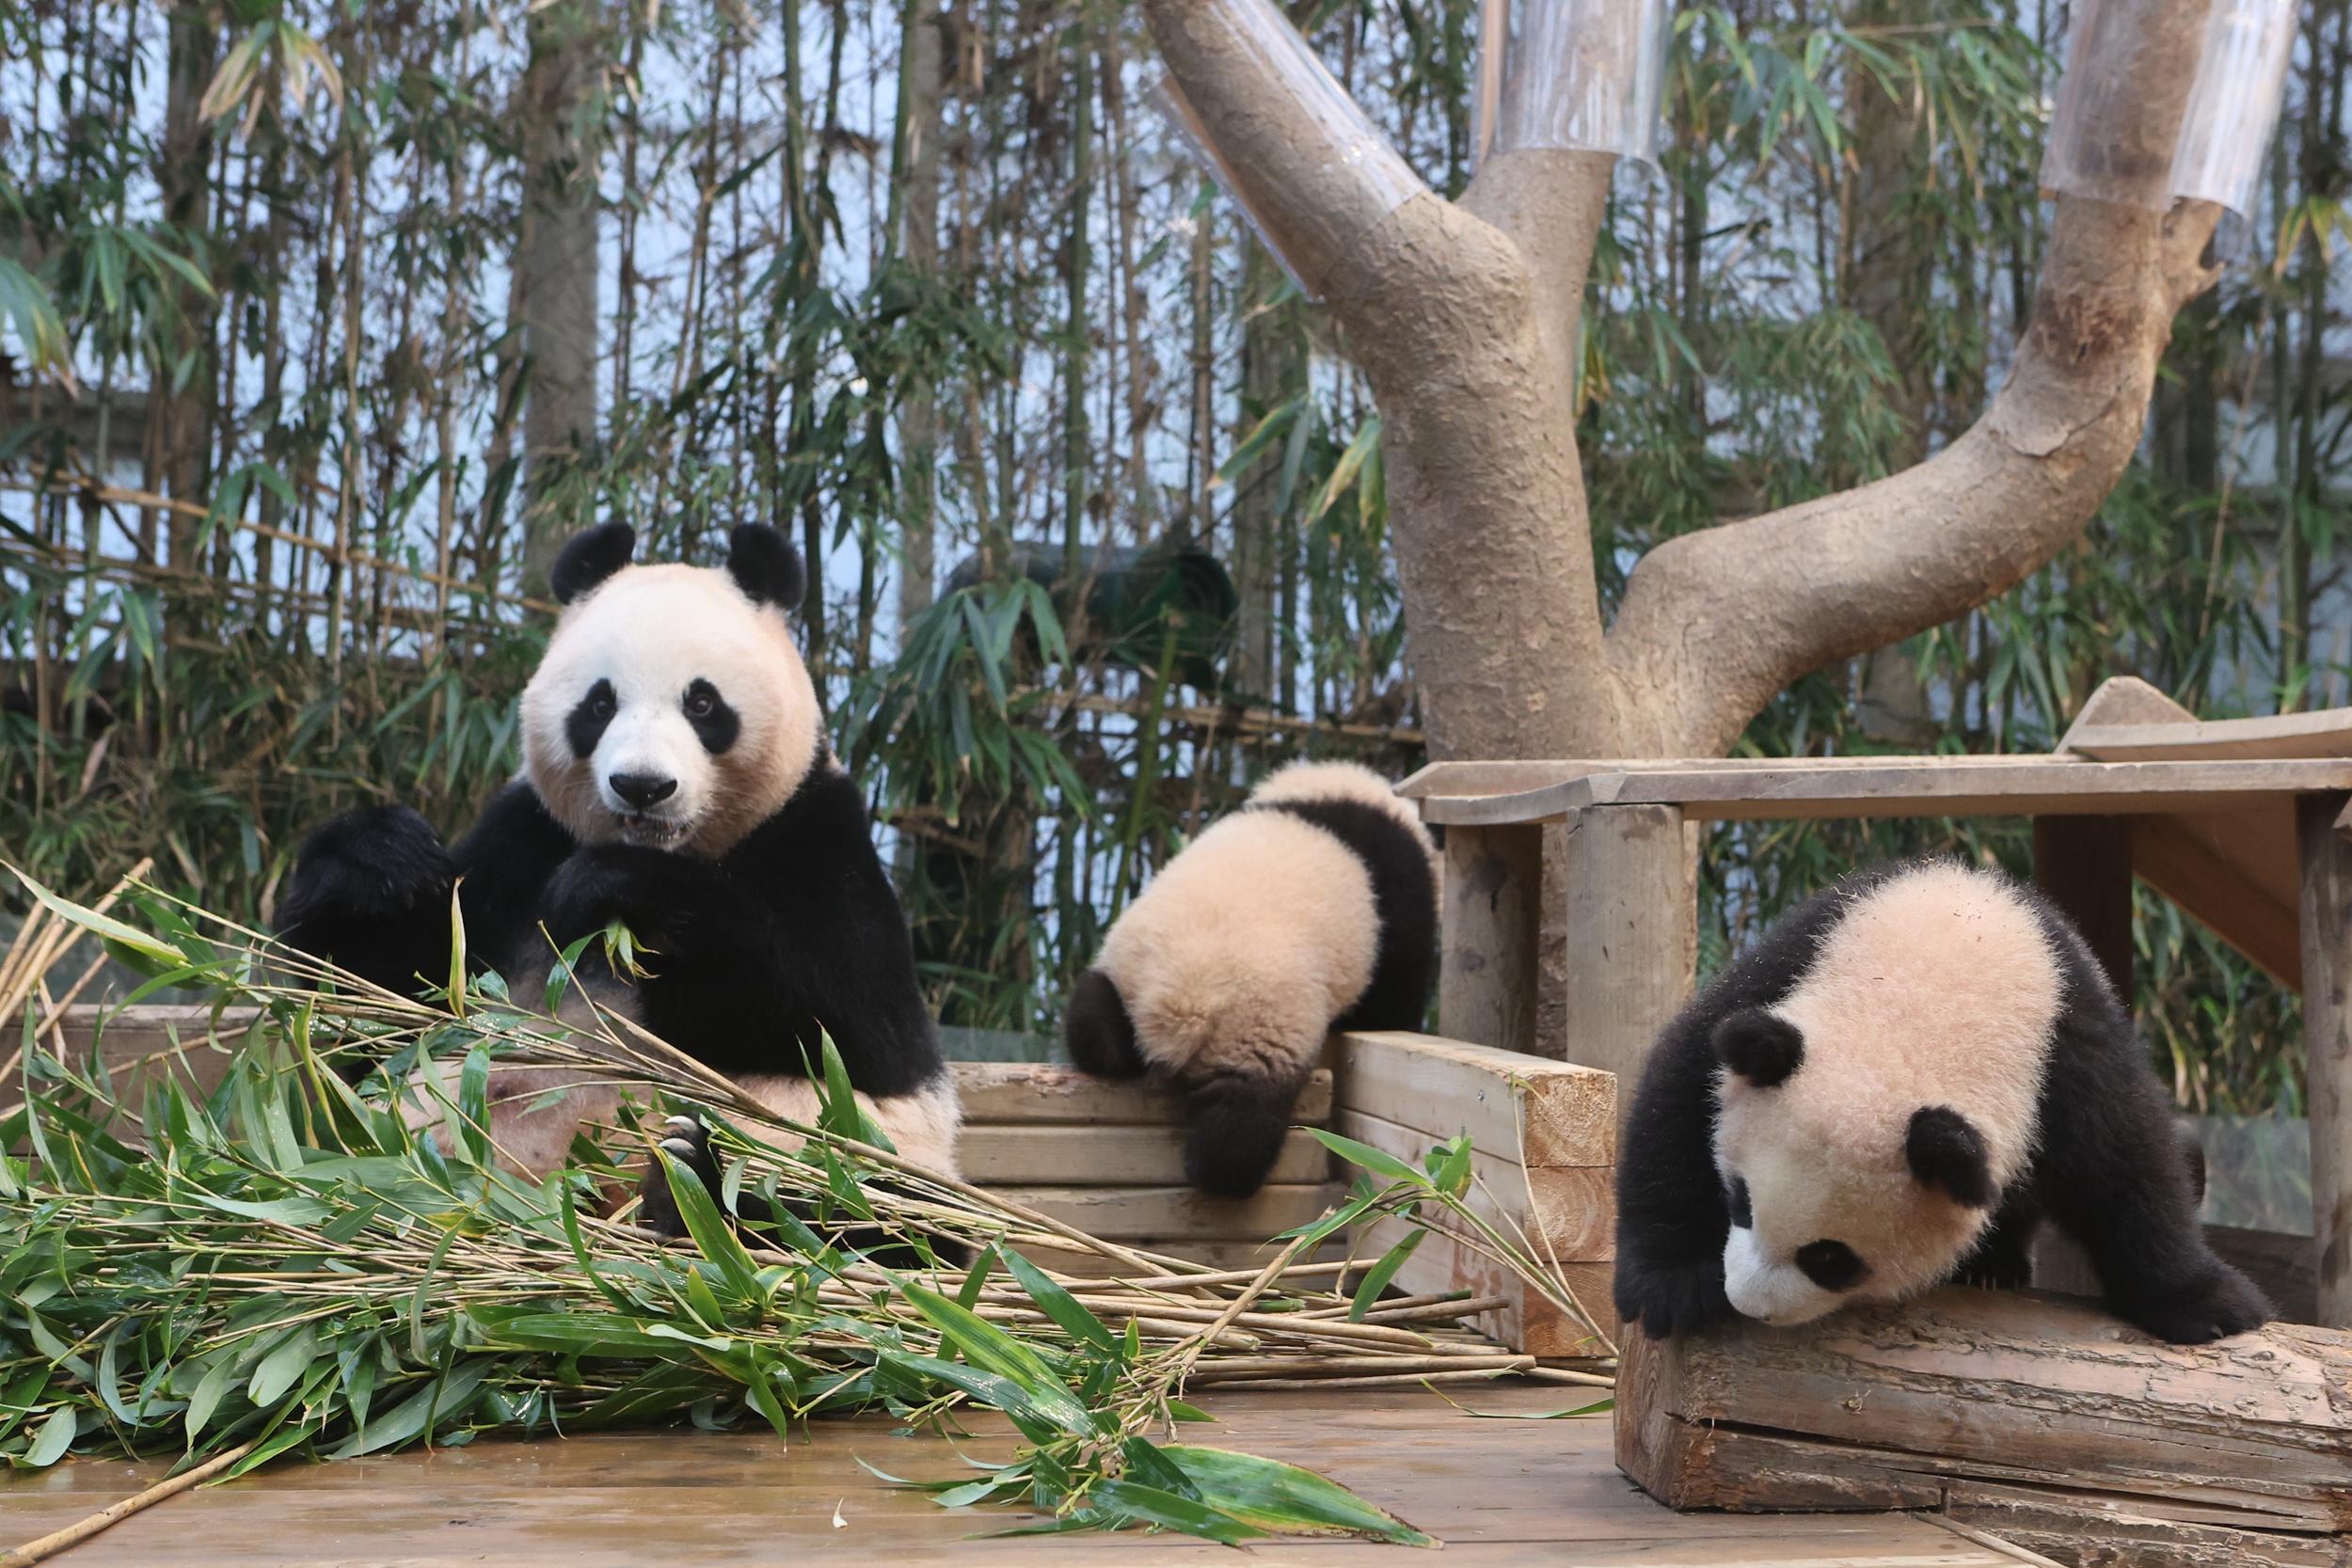 While mother Ai Bao munches on some bamboo, the little twins seem more interested in exploring.